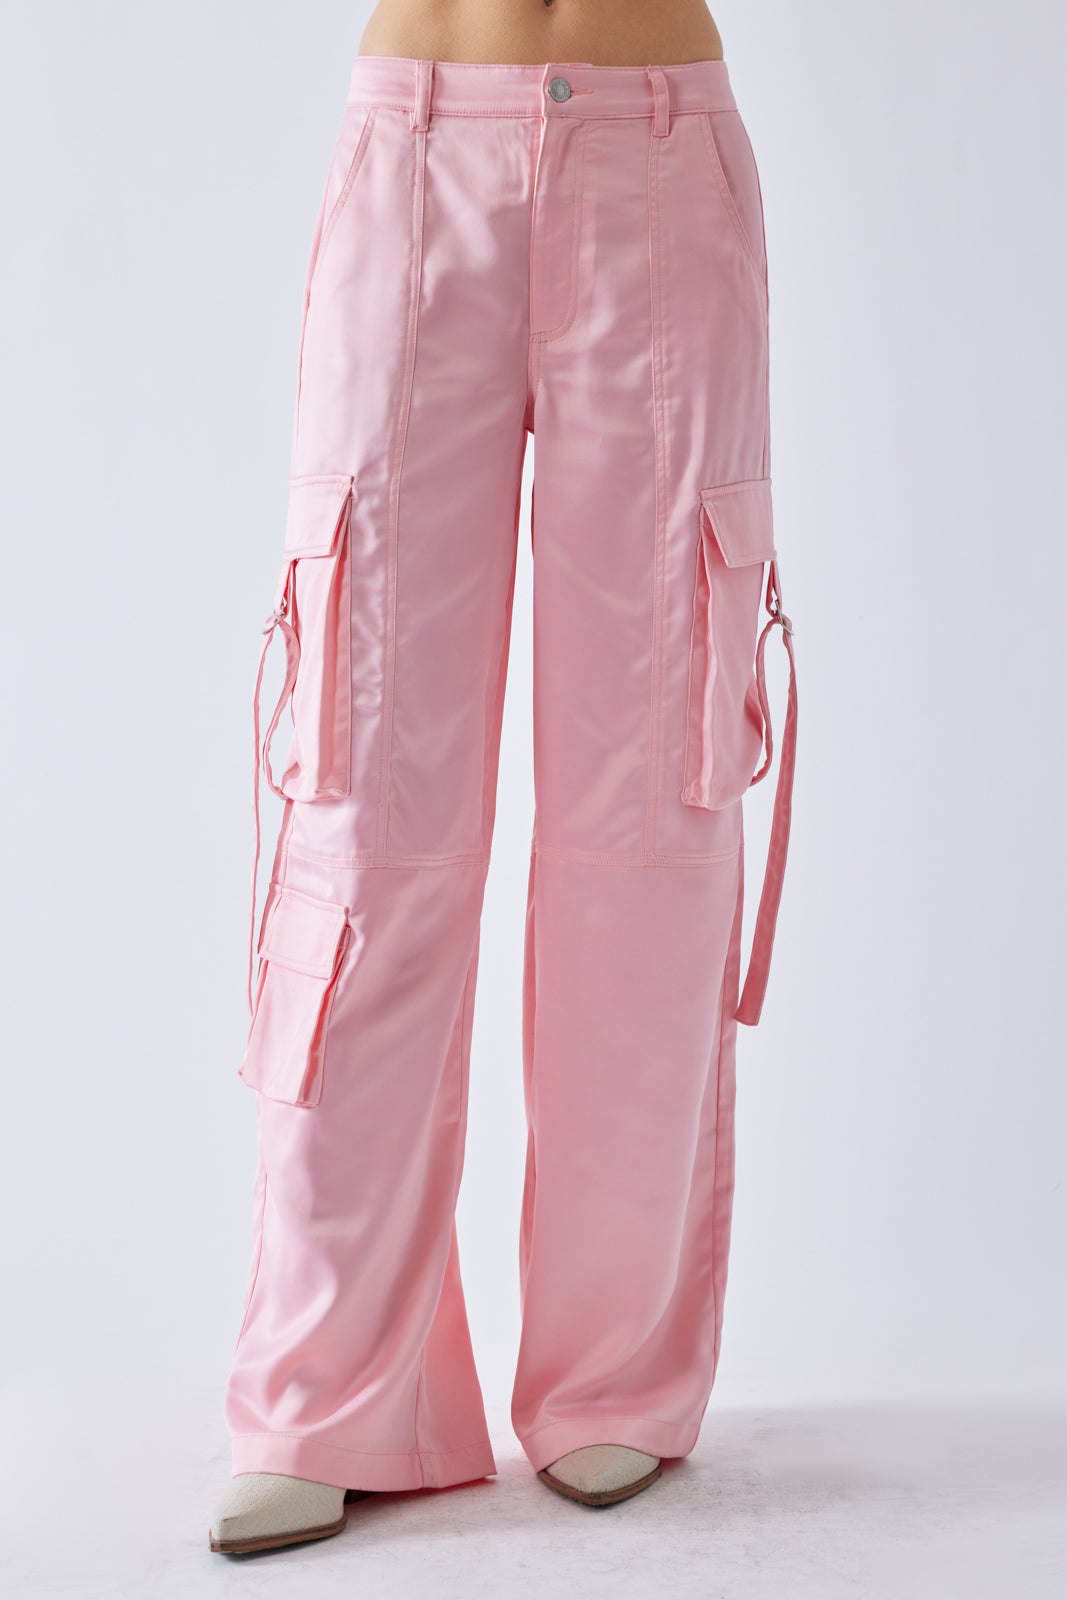 Cargo Pant With Buckle Strap Pockets Pink | LIT Boutique